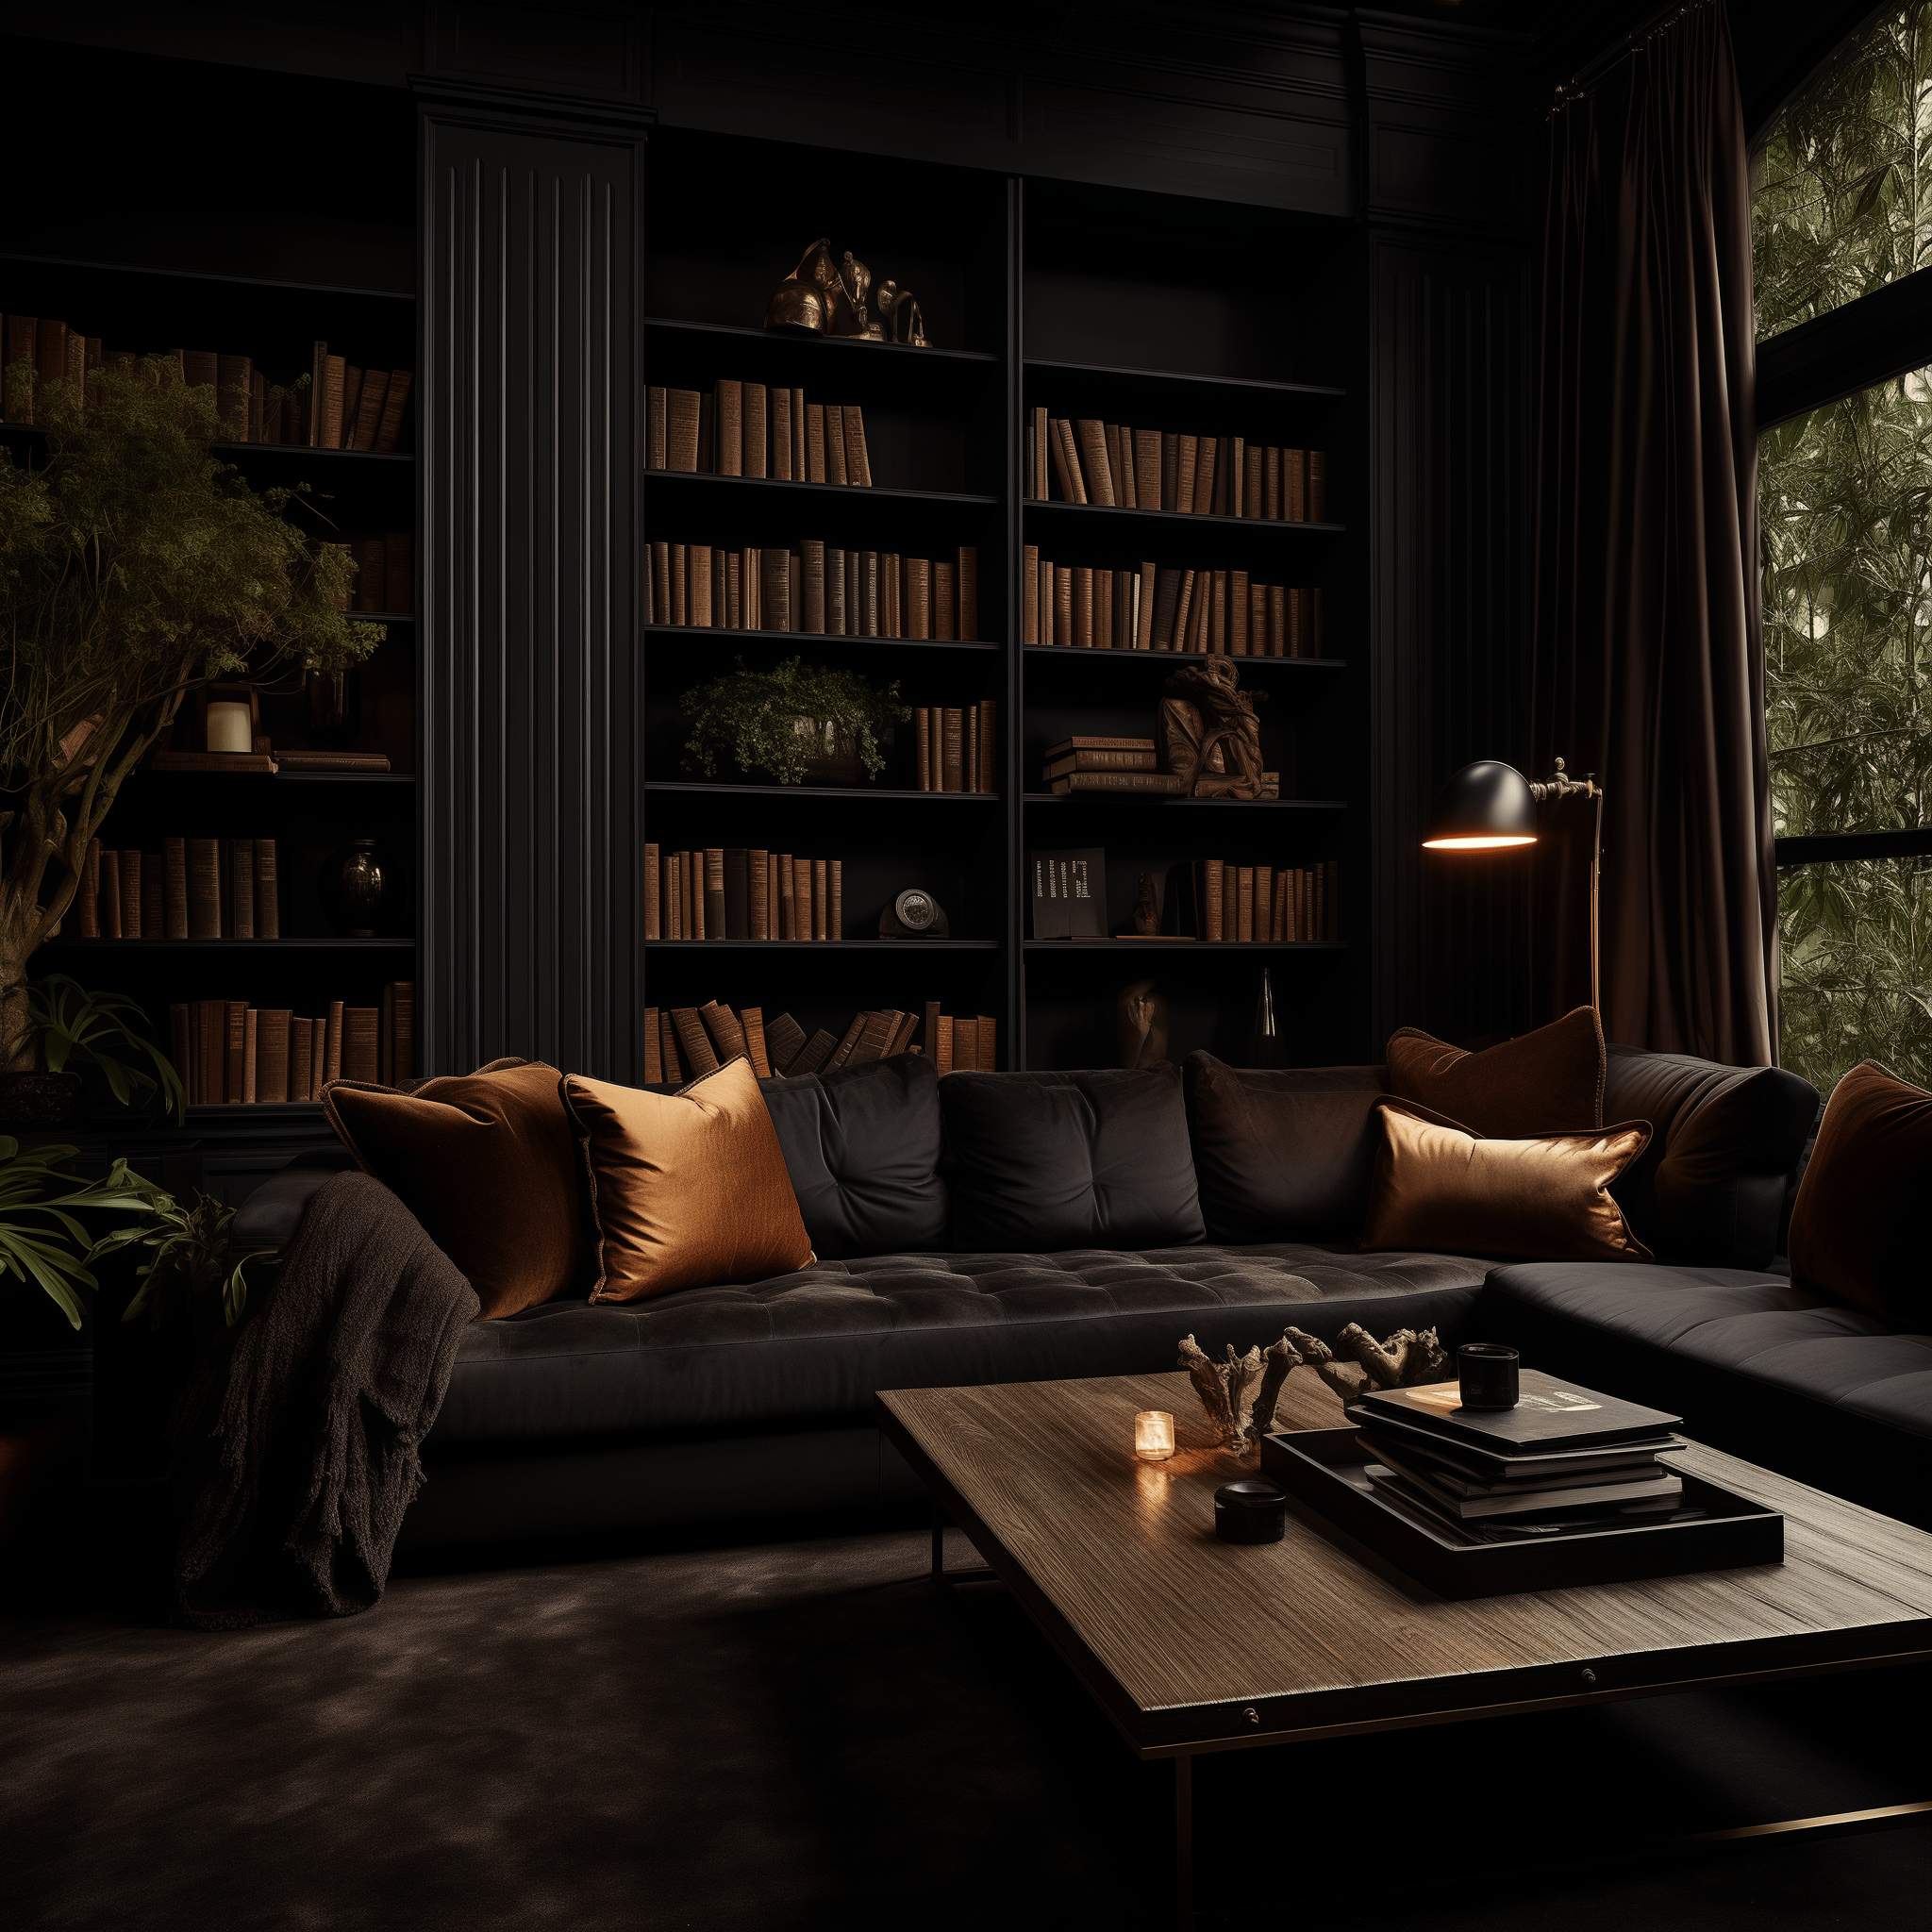 Eye-level view of a homely dark living room, featuring a blend of elegant textiles and designer furniture in natural light.